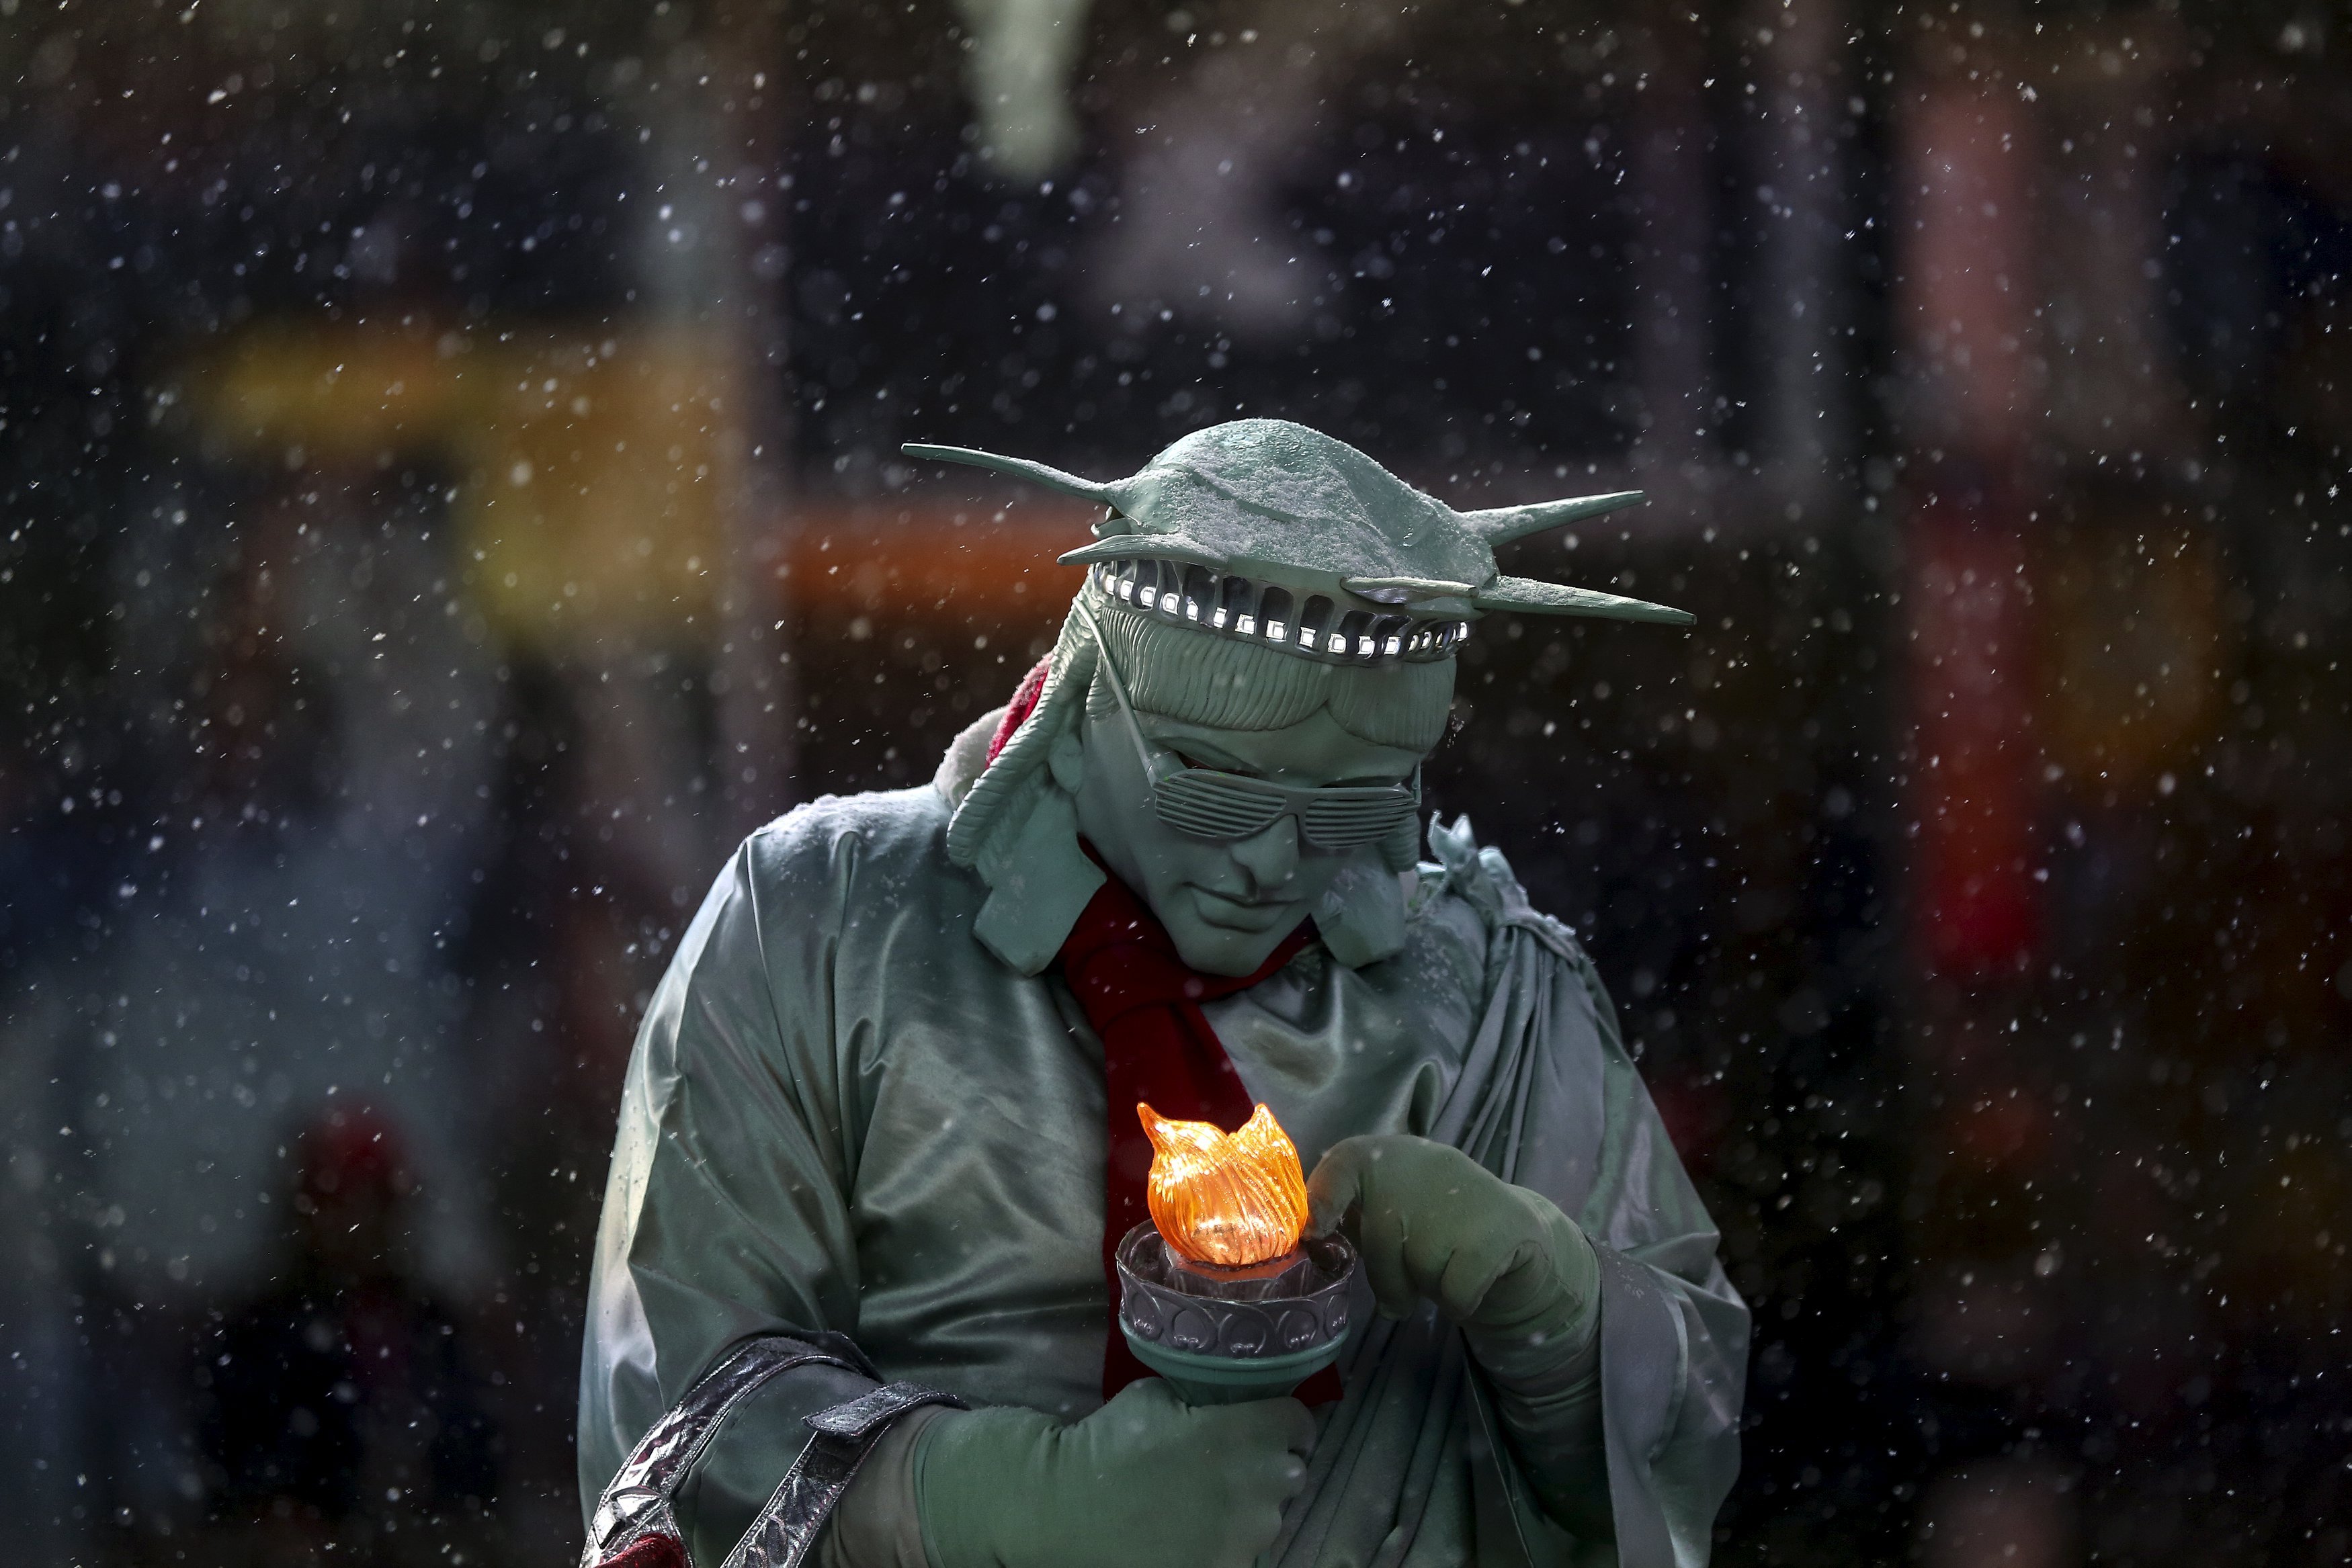 A man dressed as the  Statue of Liberty  tries to fix his light as it begins to snow in Times Square, New York City on Jan. 22, 2016.